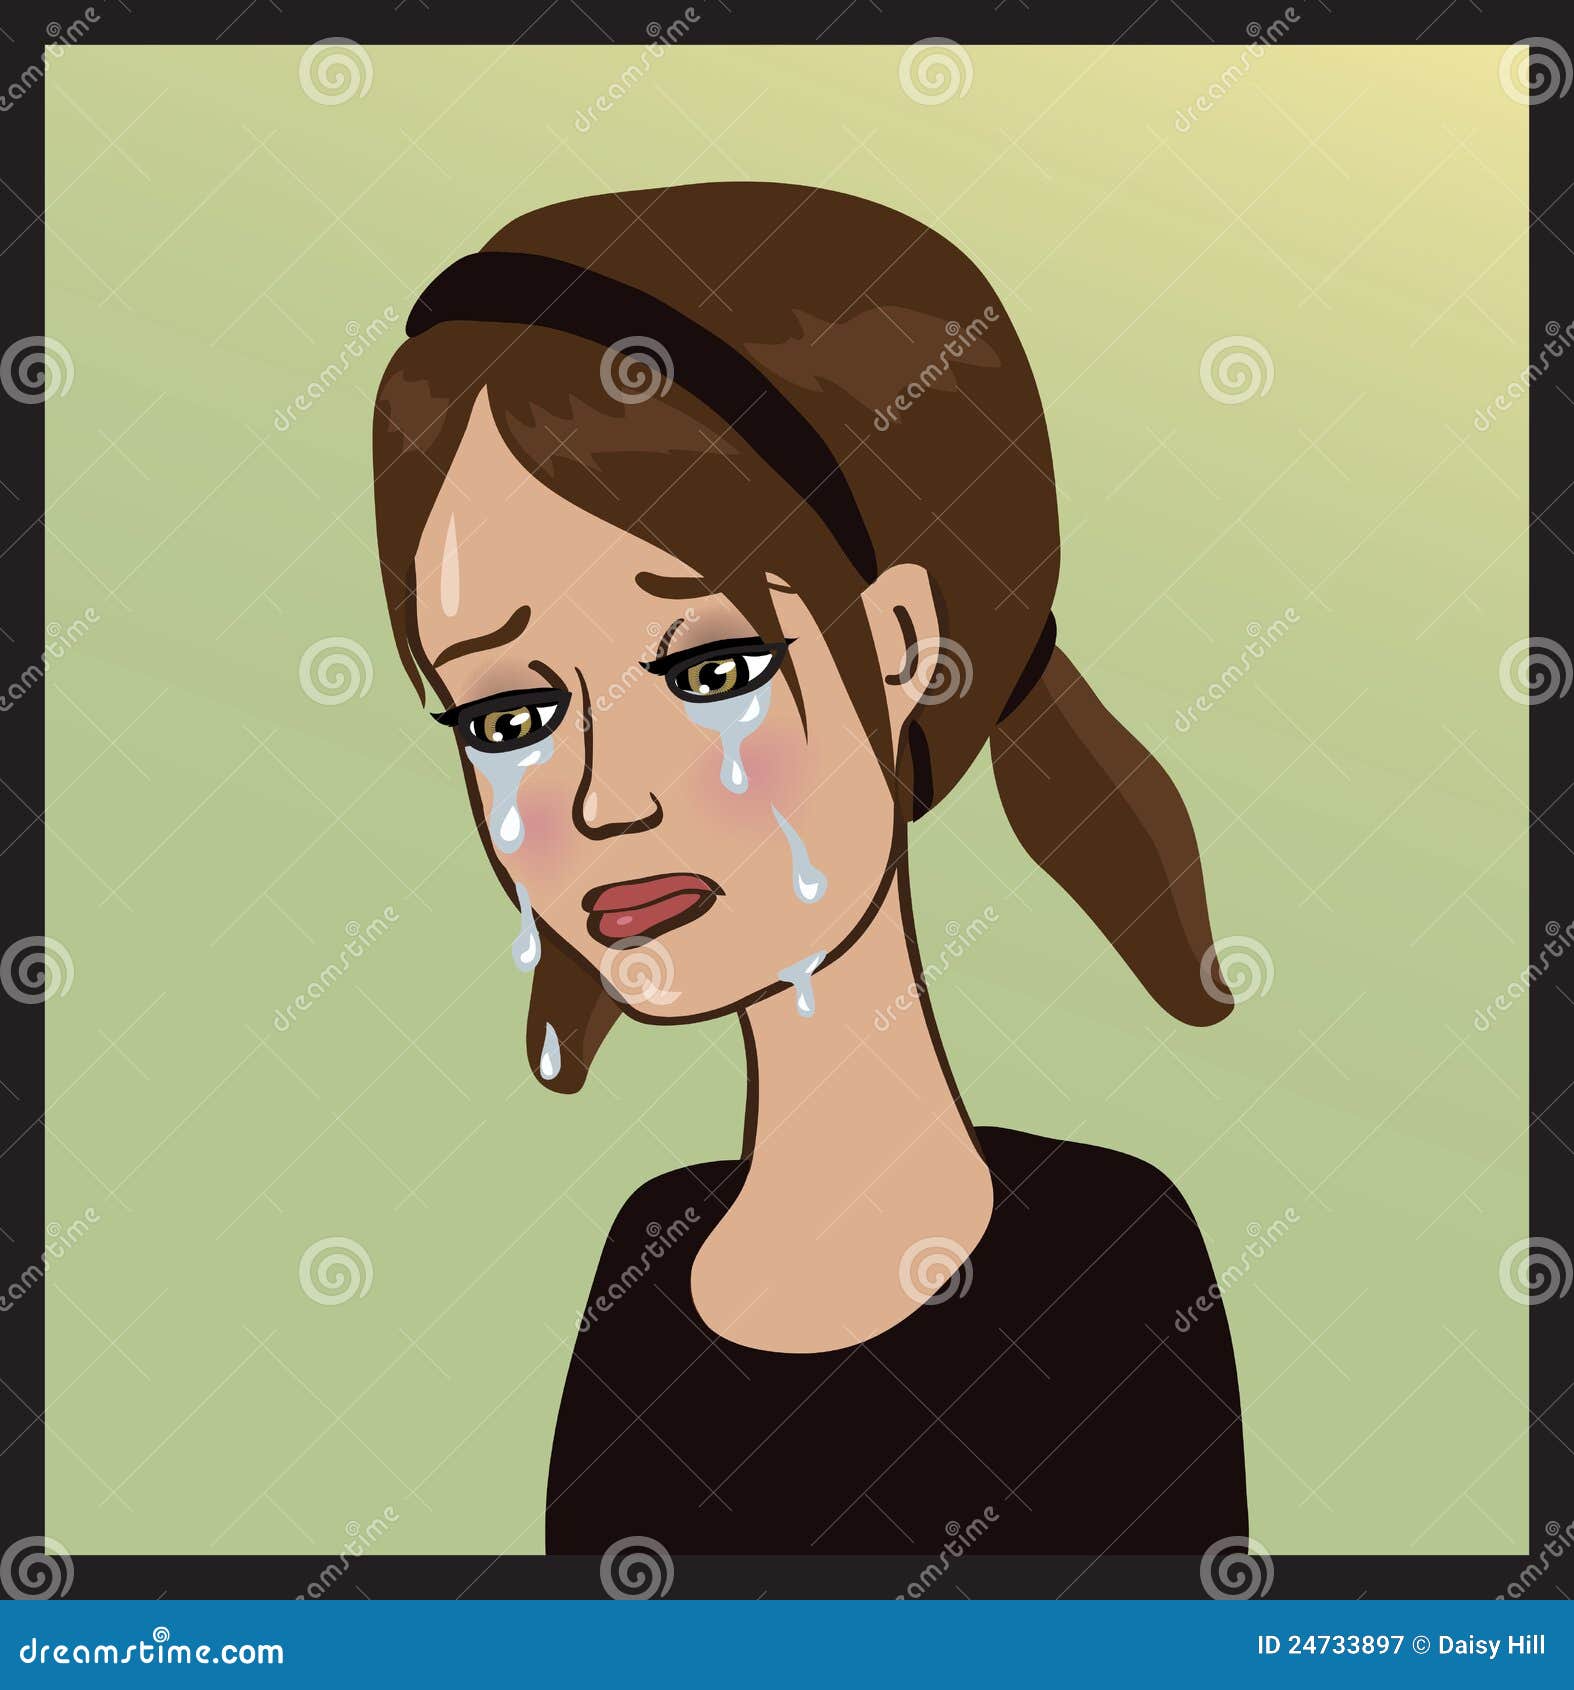 crying girl clipart - photo #22